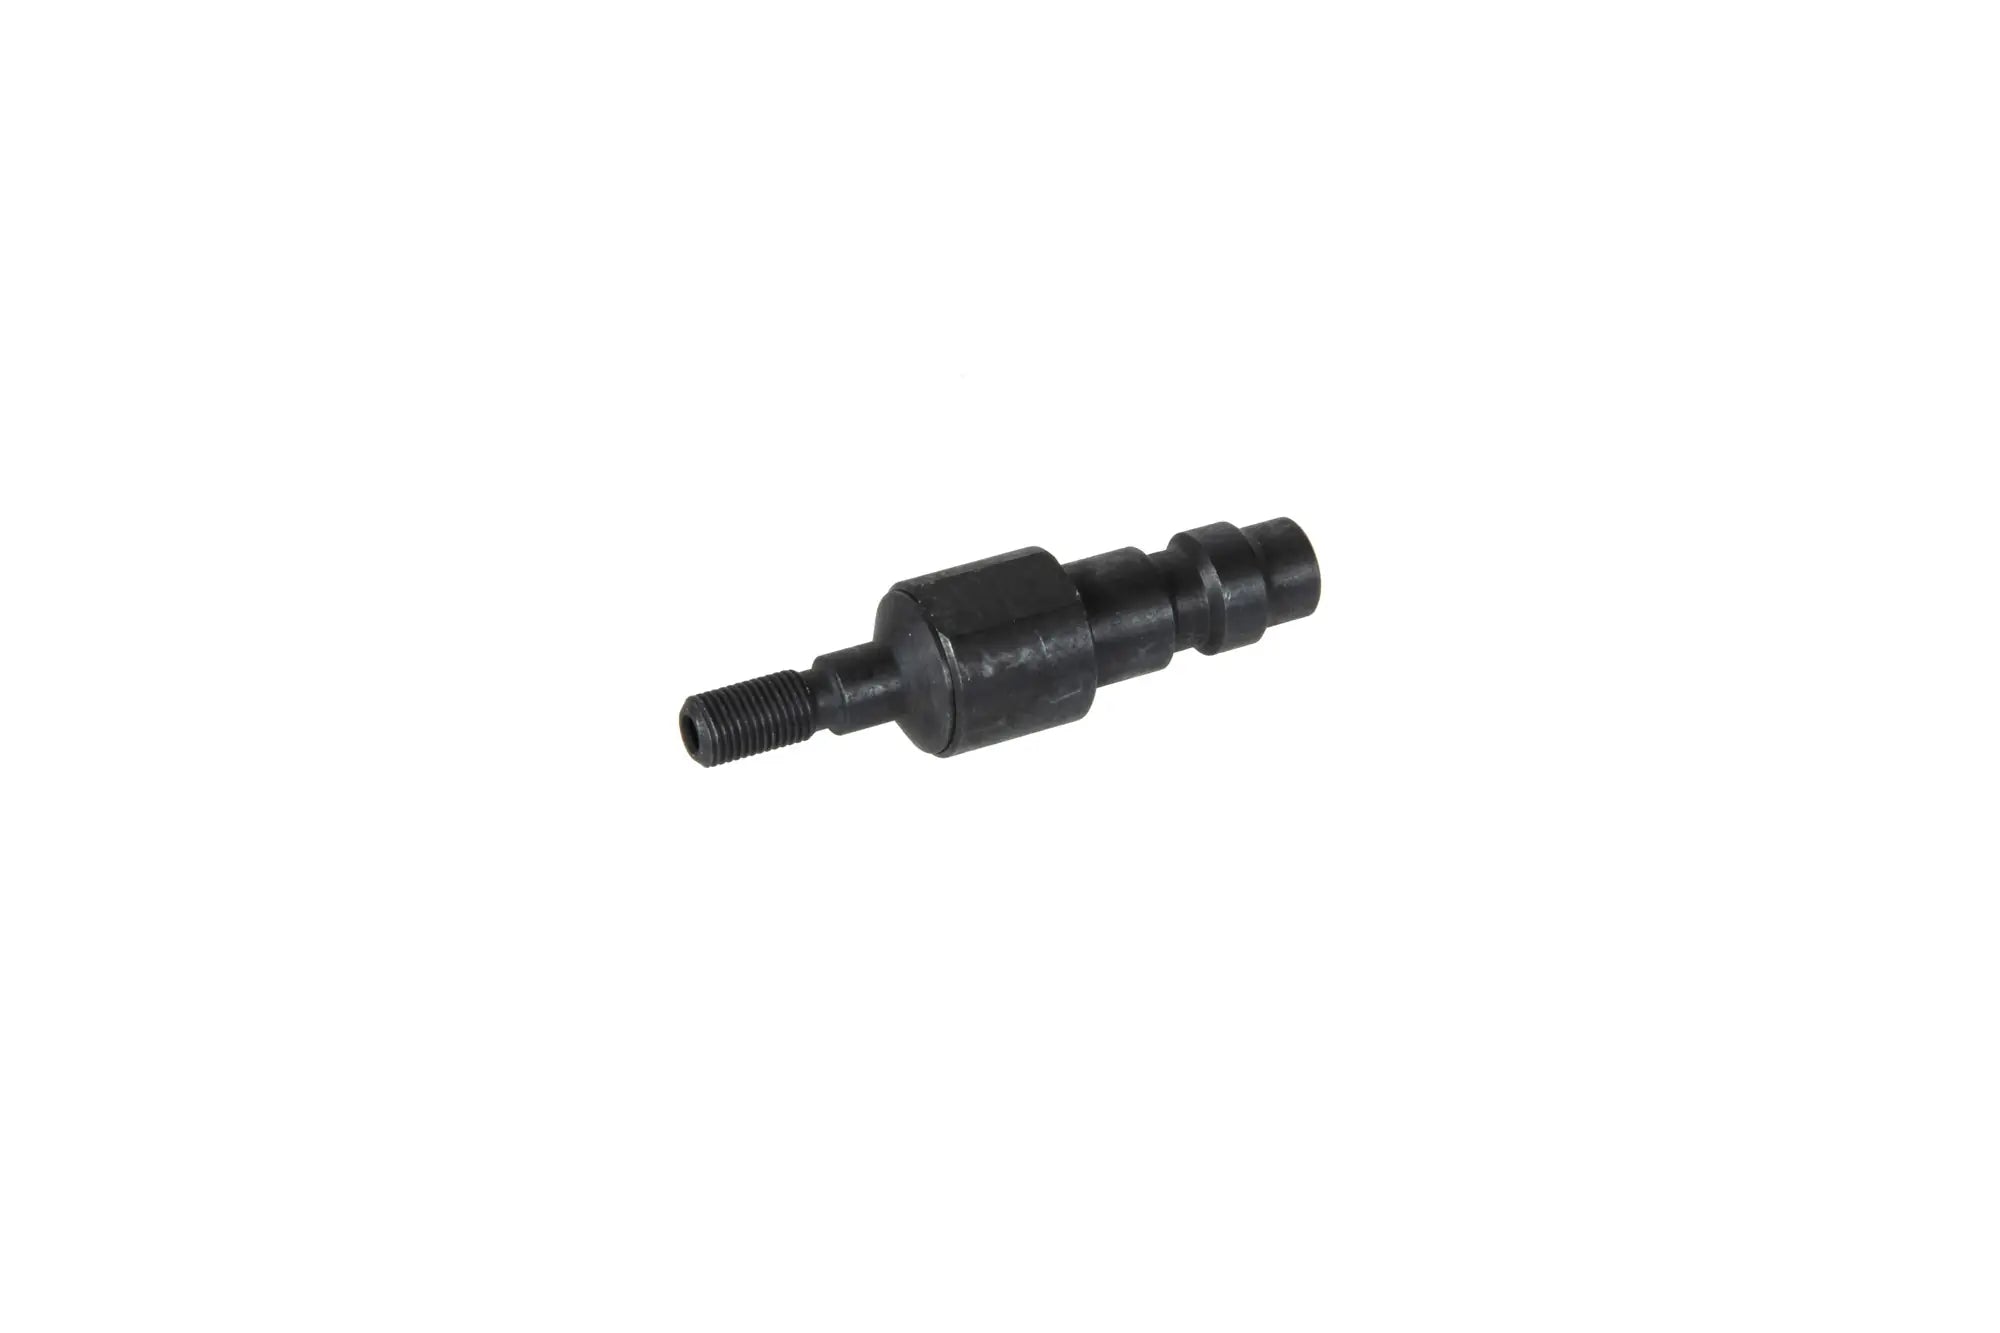 Adapter HPA to GBB SC (self closing) / E102-TM